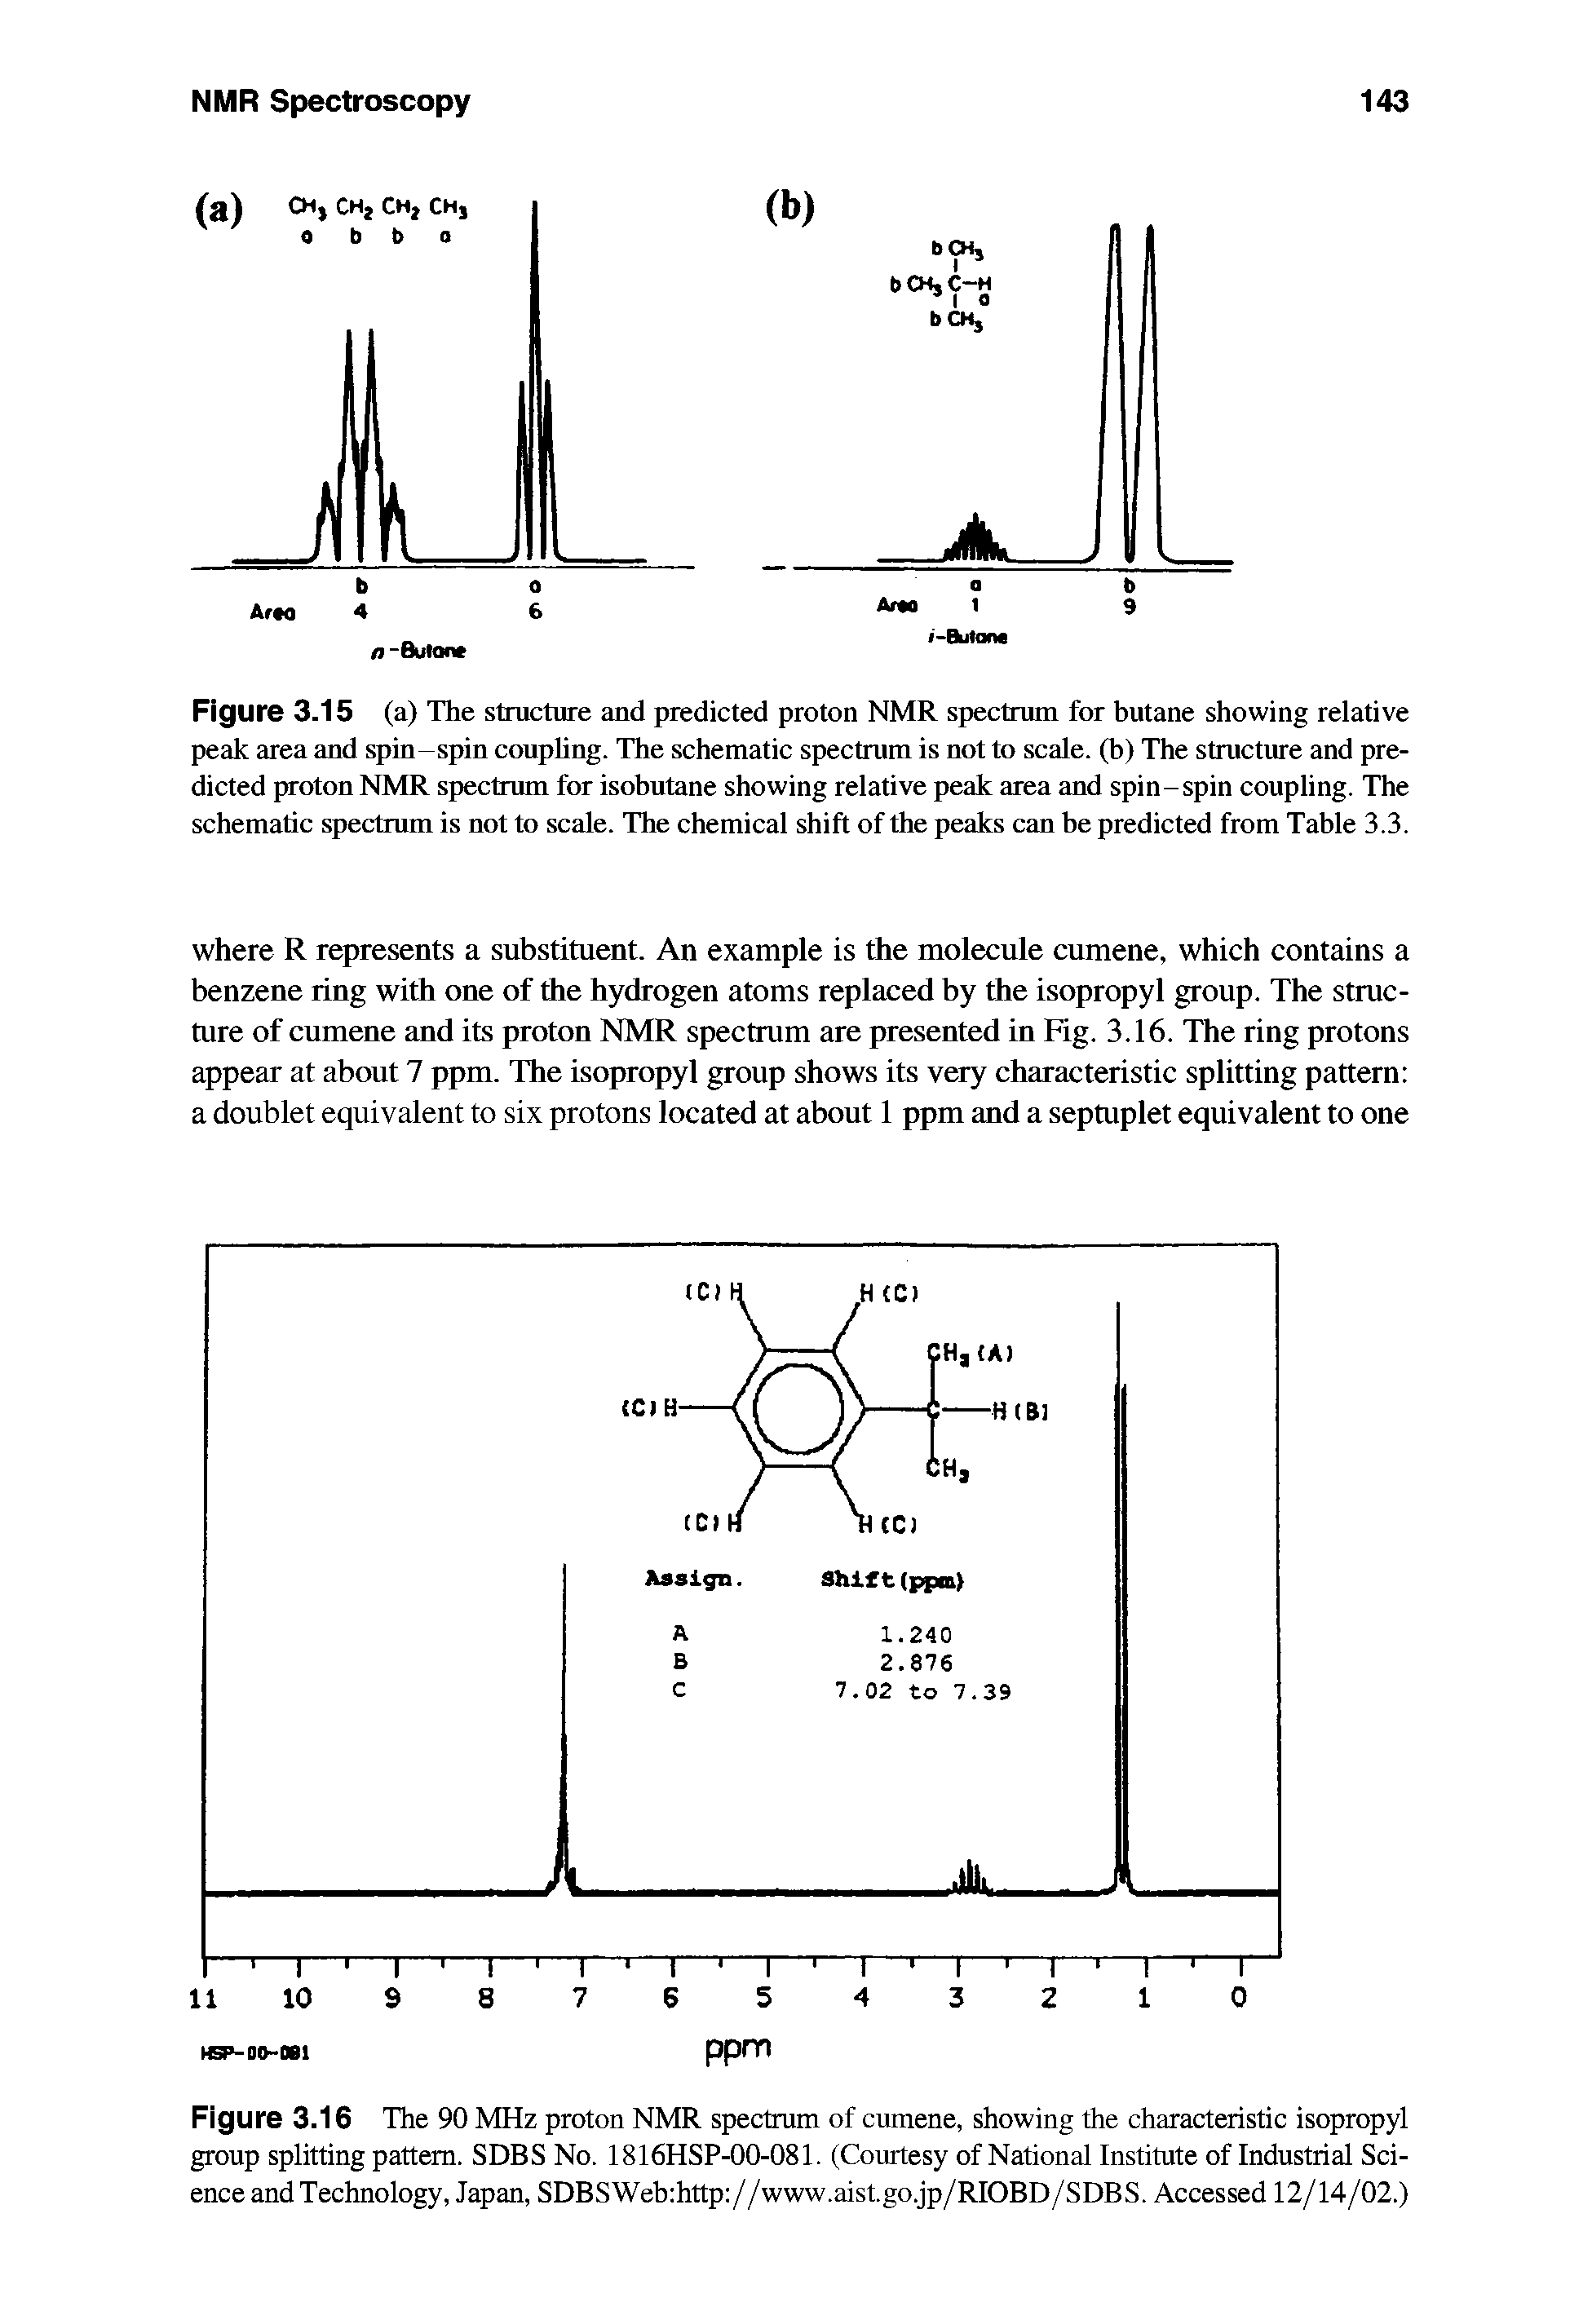 Figure 3.16 The 90 MHz proton NMR spectmm of cumene, showing the characteristic isopropyl group splitting pattern. SDBS No. 1816HSP-00-081. (Courtesy of National Institute of Industrial Science and Technology, Japan, SDBSWebihttp //www.aist.go.jp/RIOBD/SDBS. Accessed 12/14/02.)...